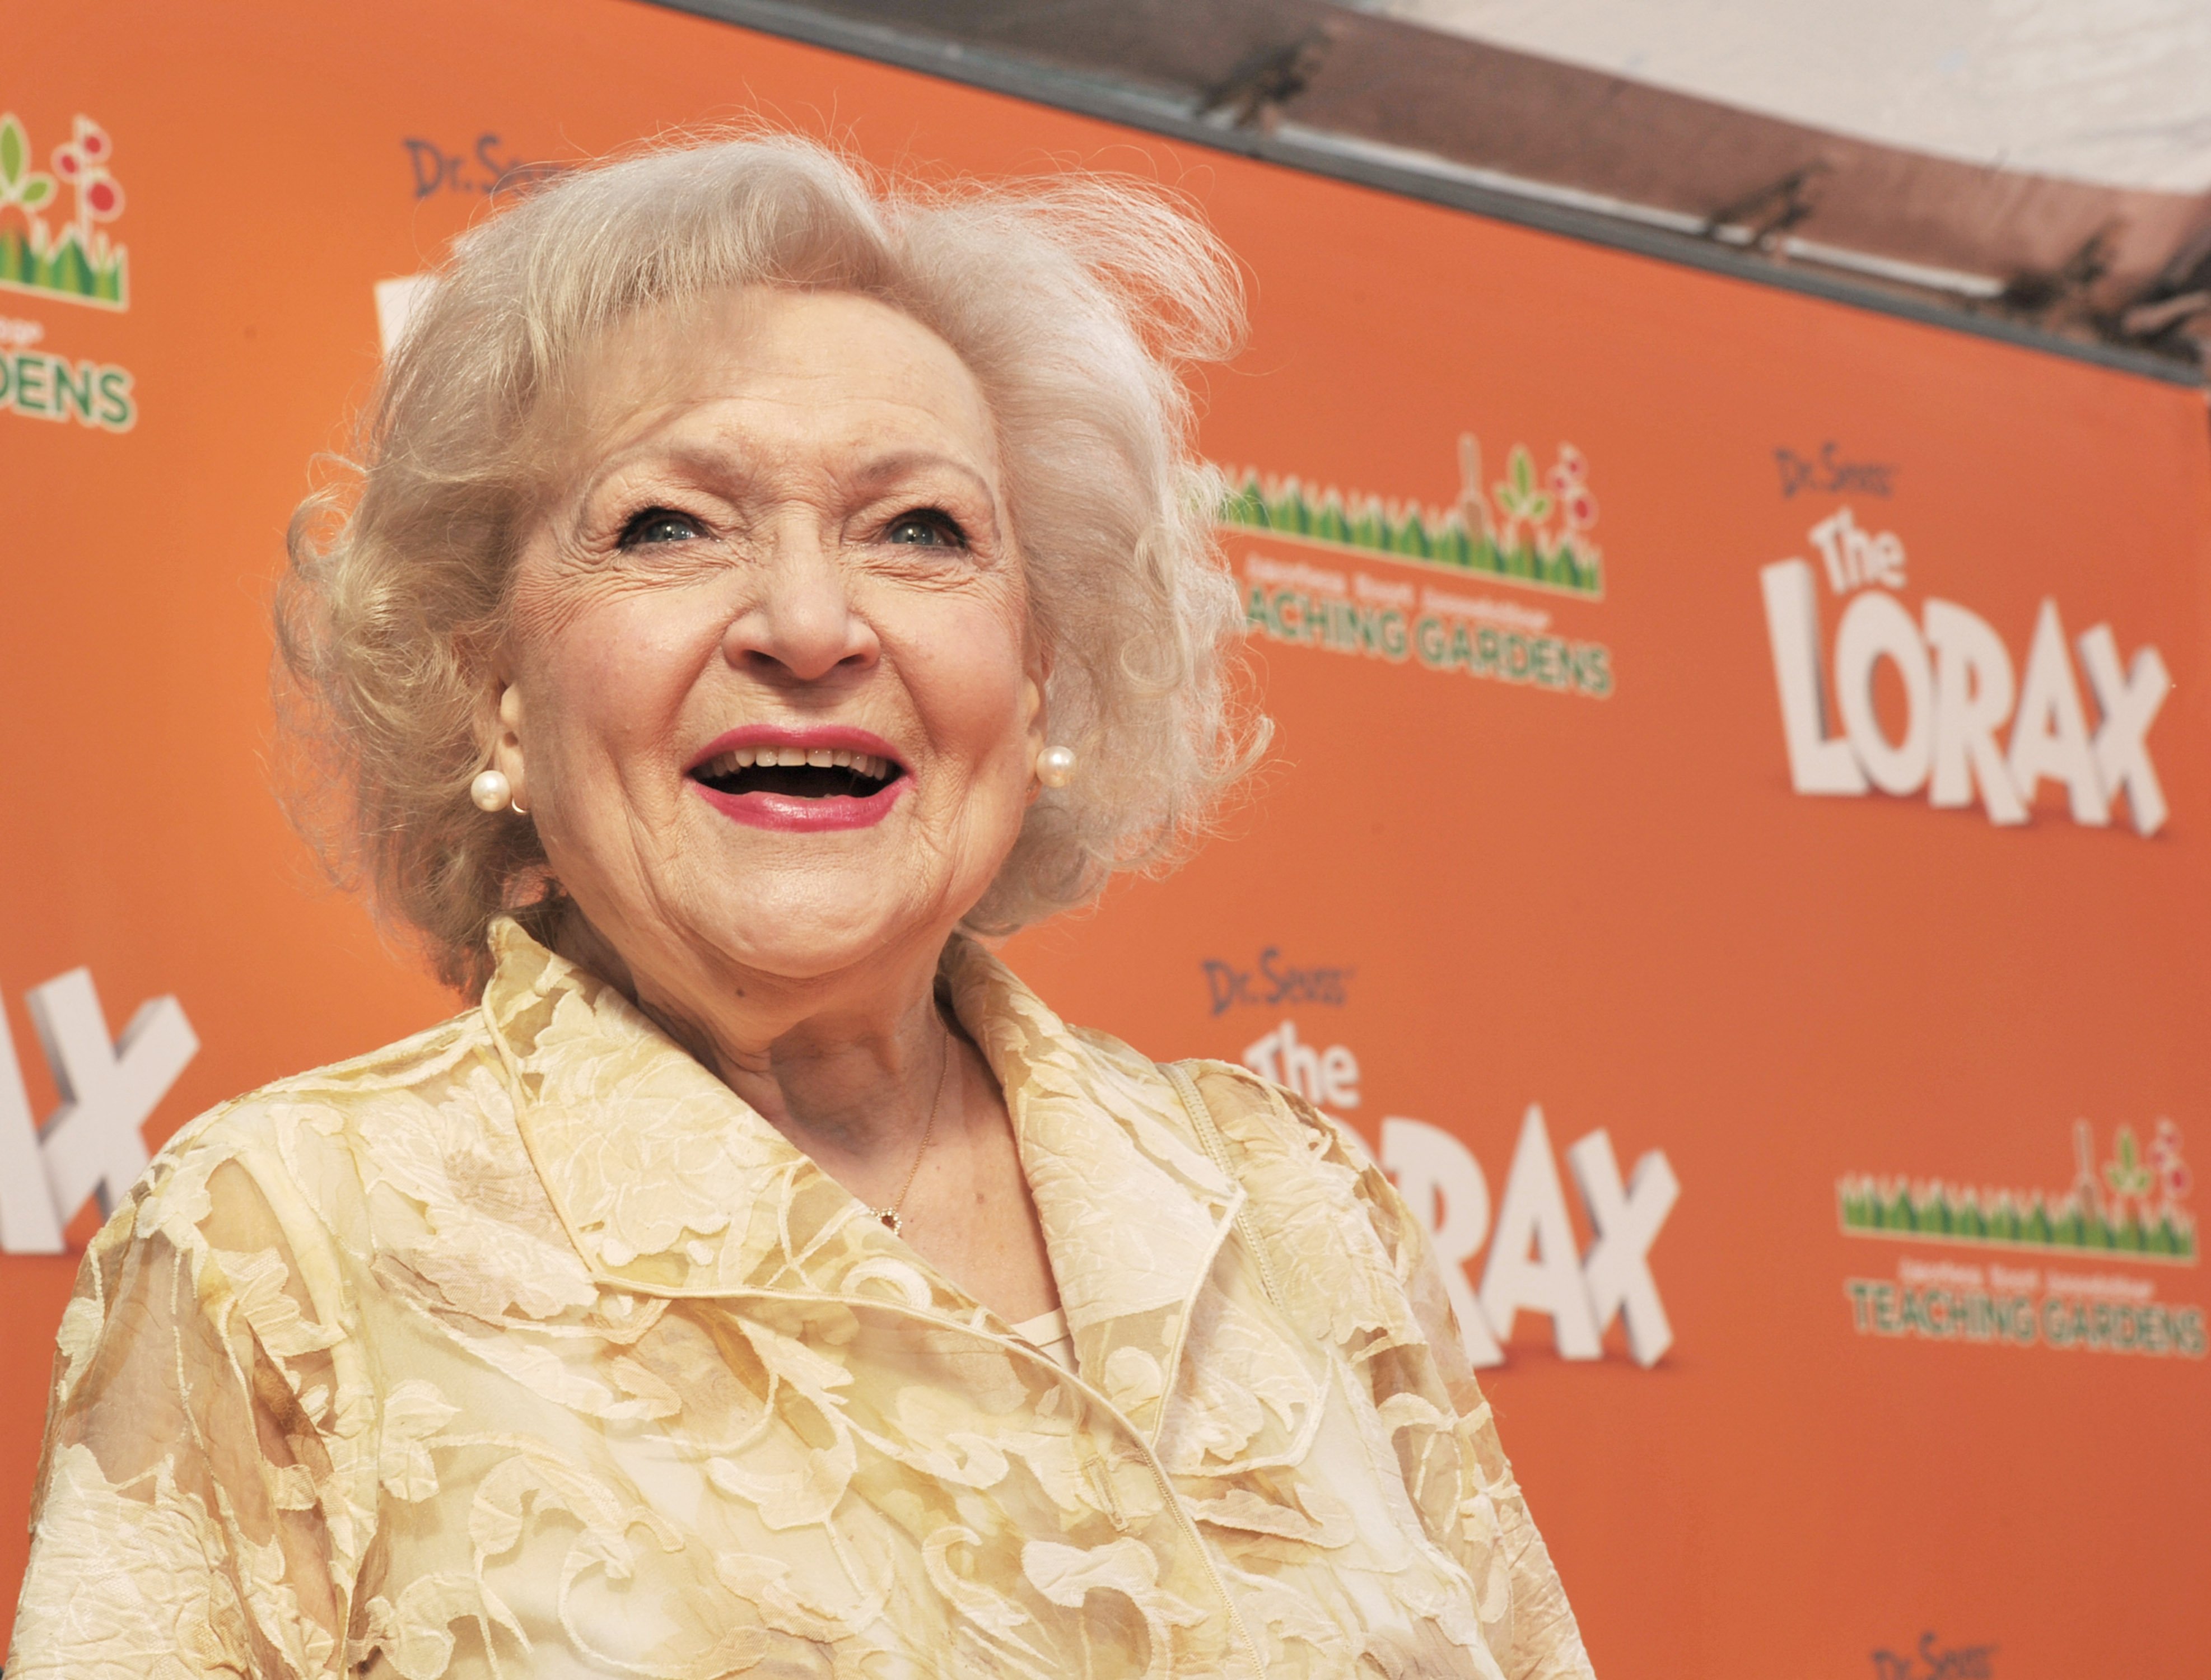 Betty White at the premiere of "Dr. Seuss' The Lorax" at Citywalk on February 19, 2012 in Universal City, California | Photo: Getty Images